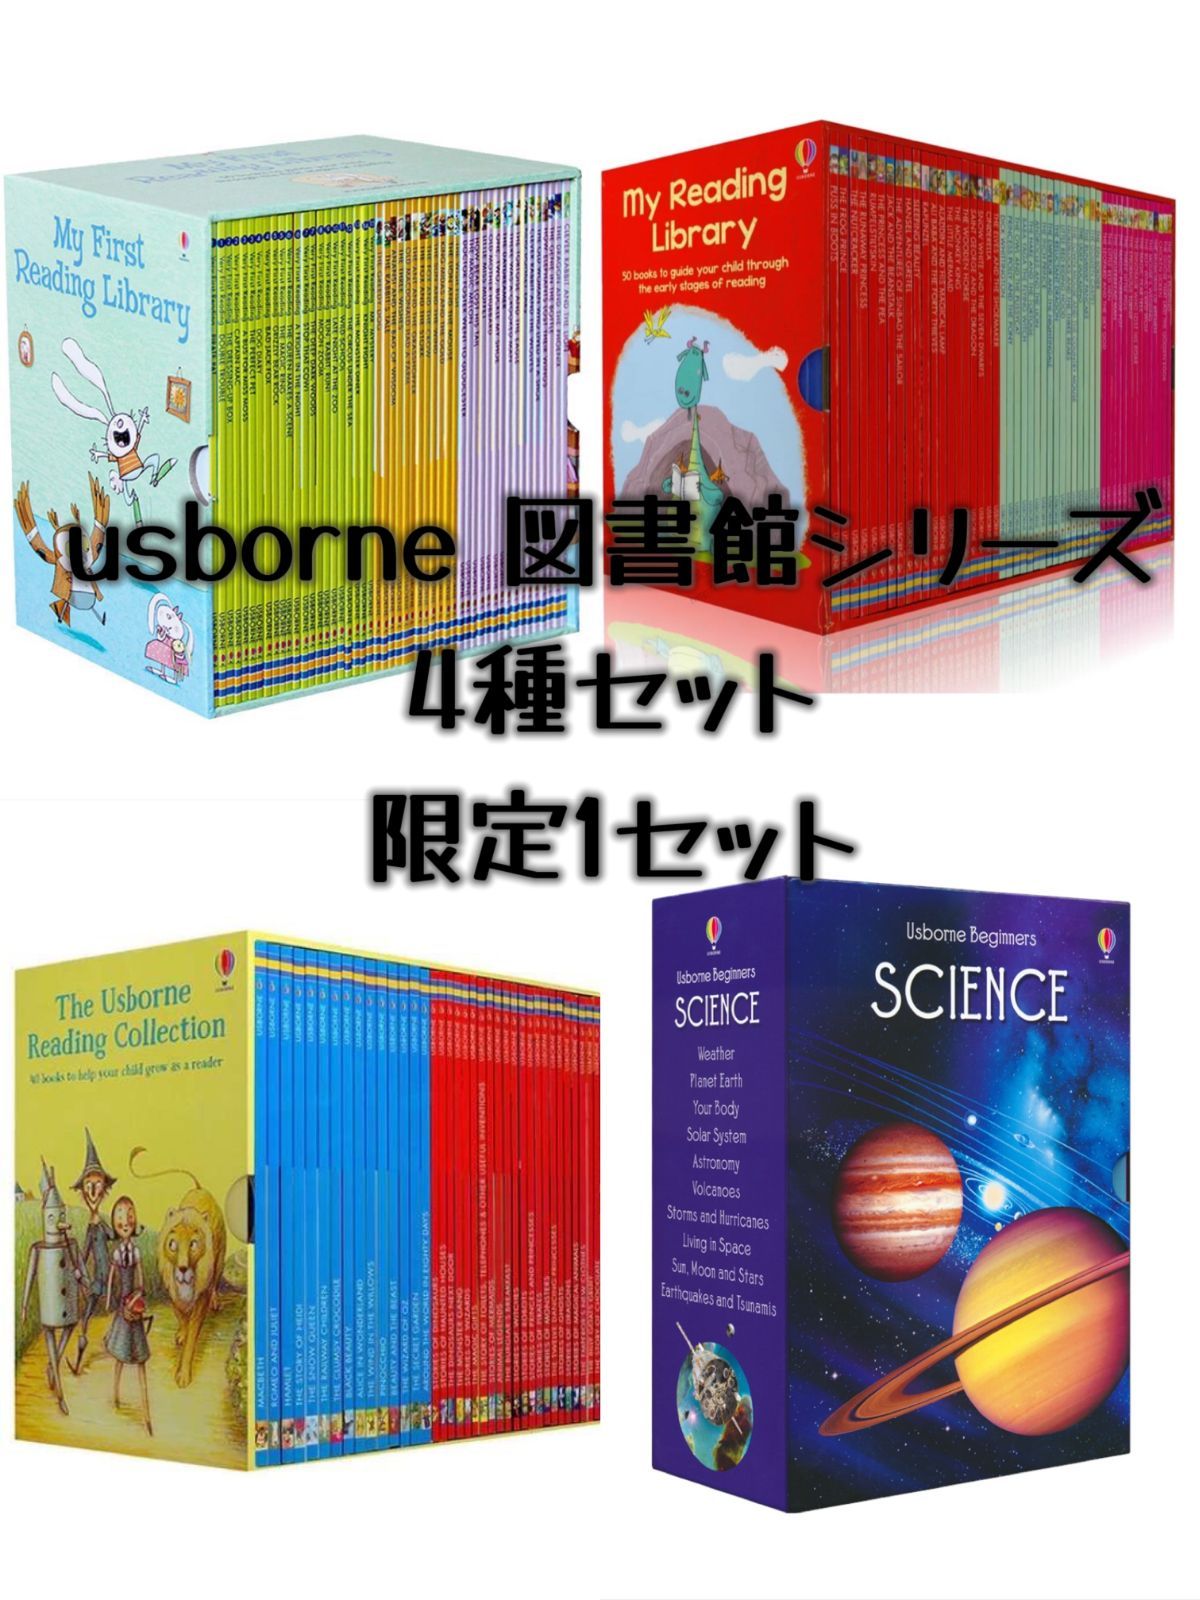 Who was 多読　solor system 中学受験　サイエンス